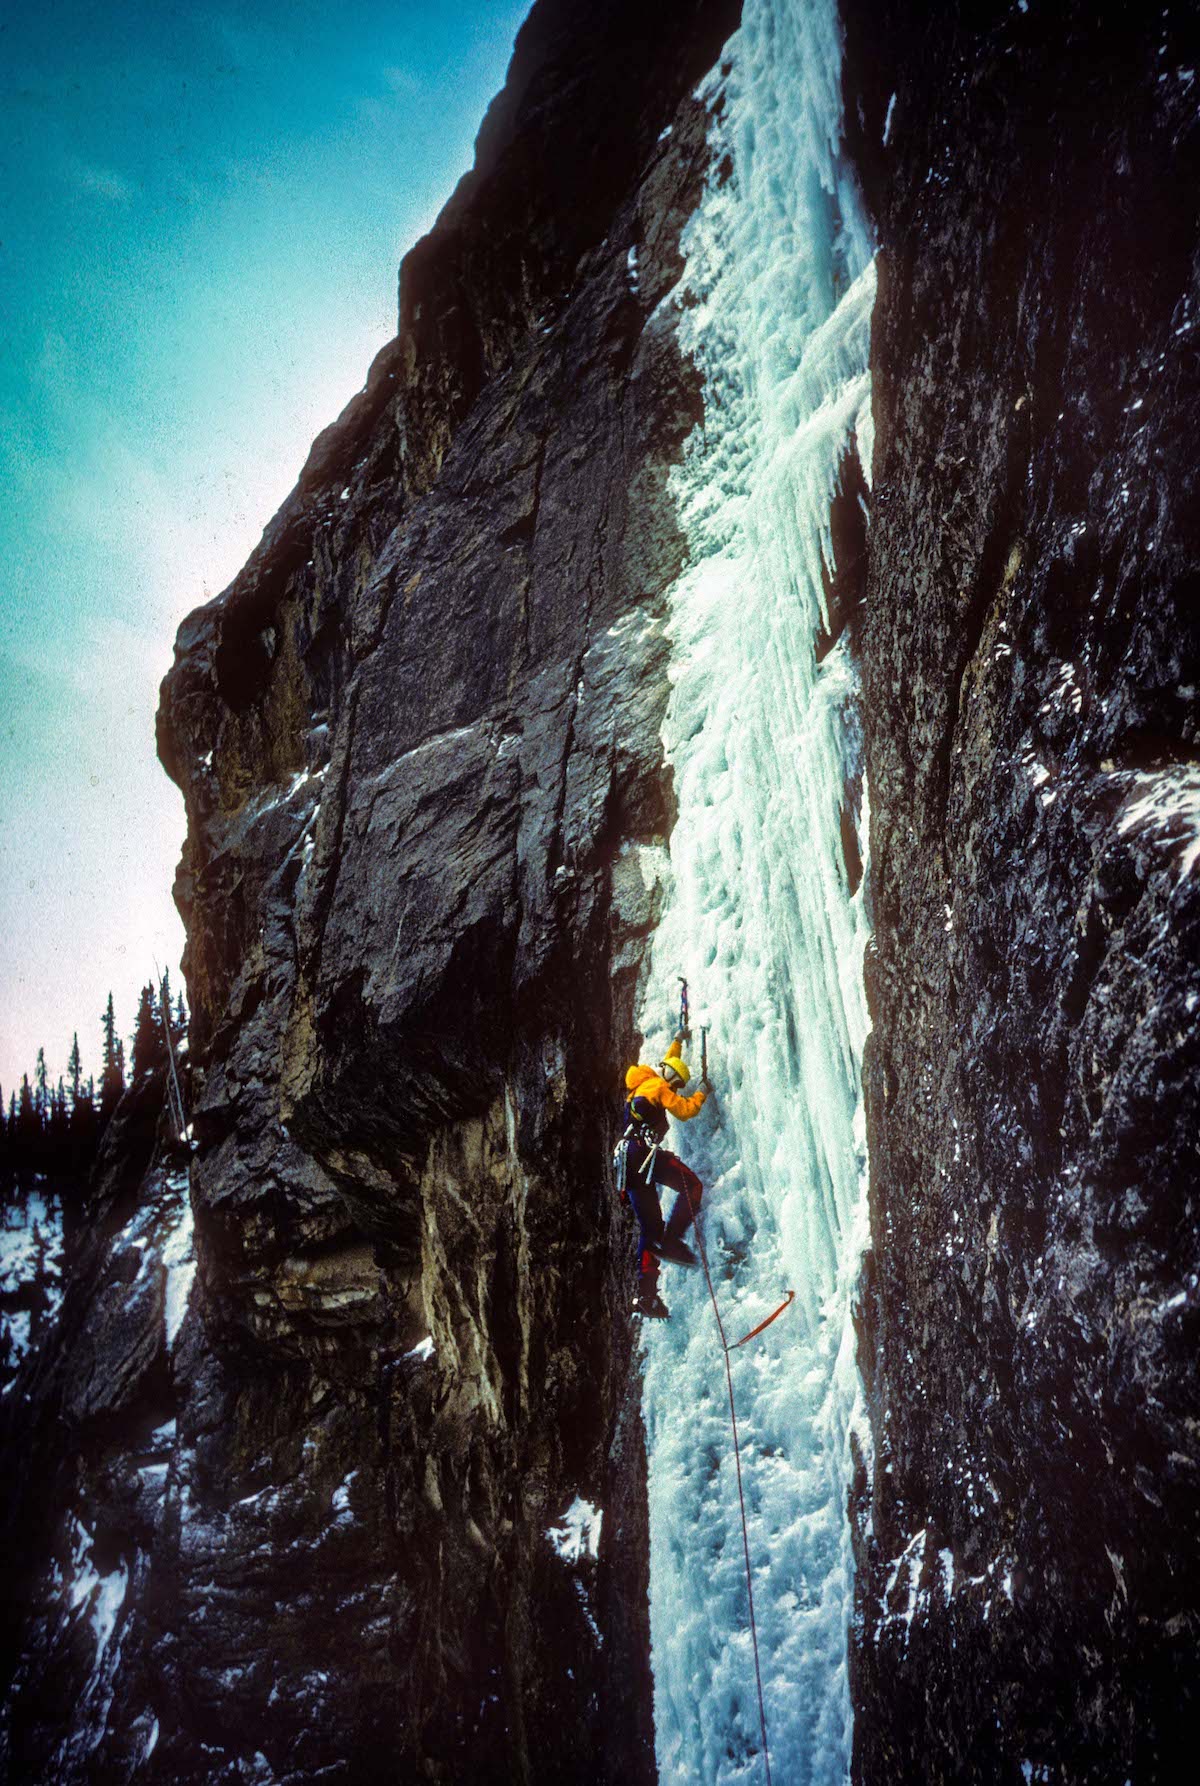 Sharon Wood leads the first pitch of Bourgeau Right-Hand in the Canadian Rockies in l985. [Photo] Pat Morrow, courtesy of Mountaineers Books